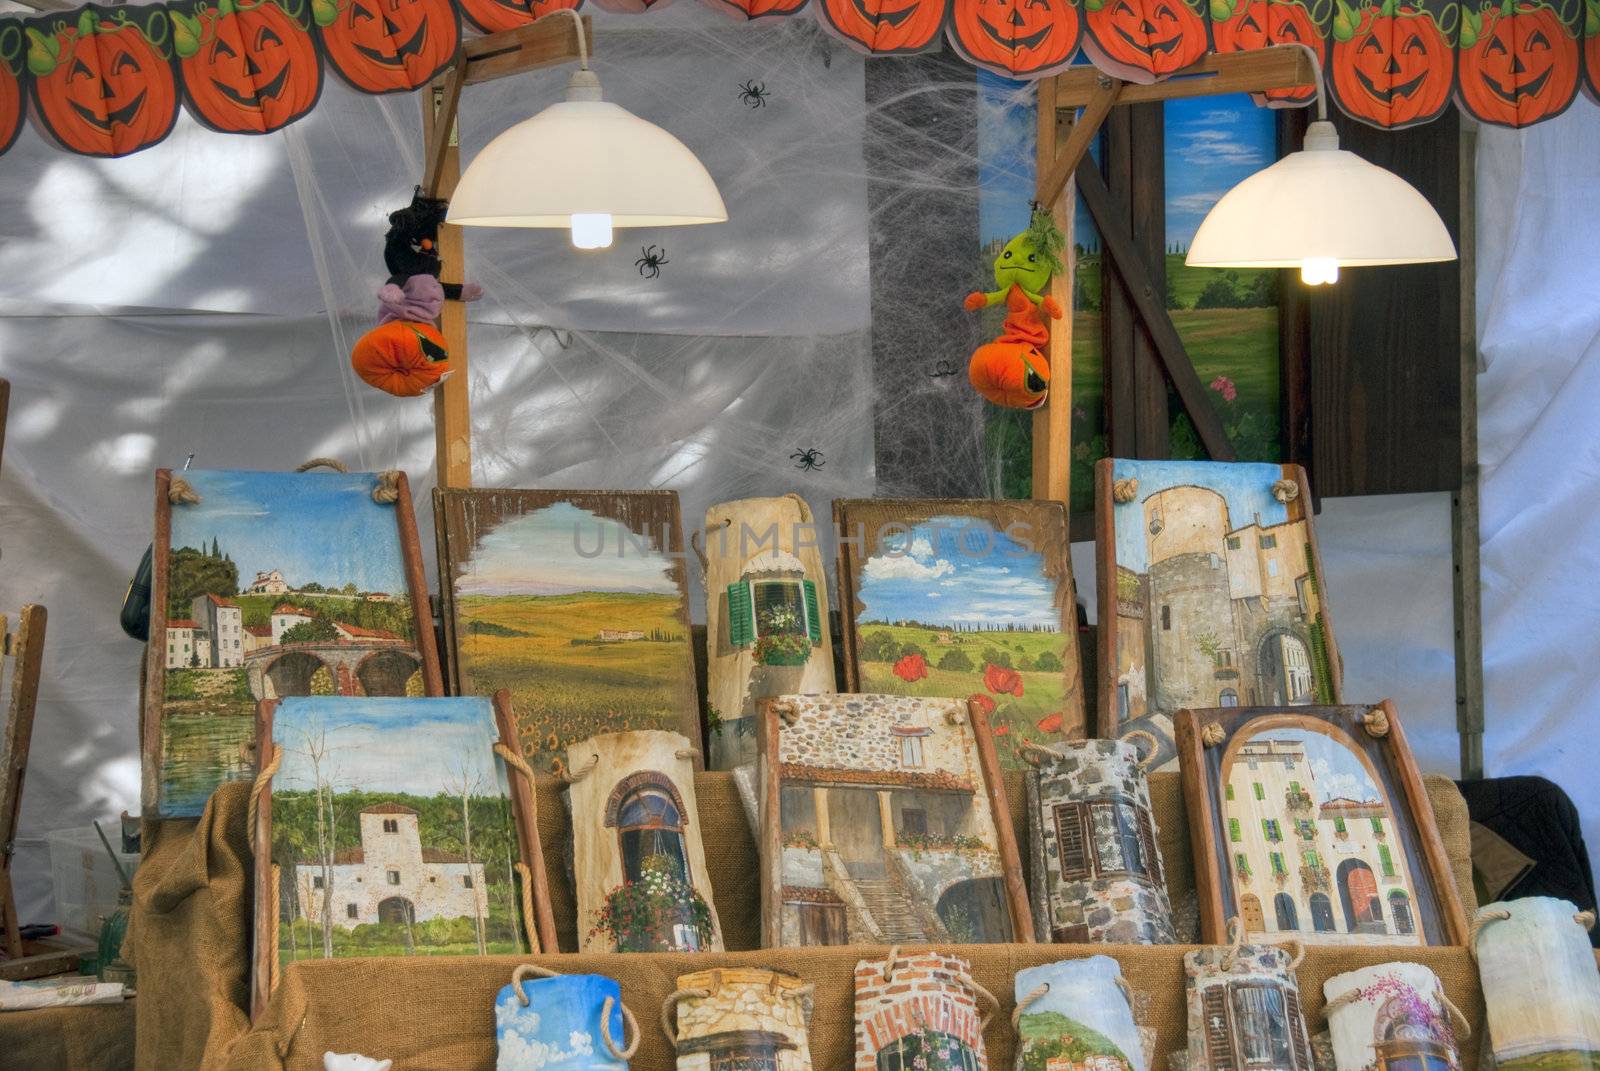 Paintings in a Market, Lucca, Italy by jovannig